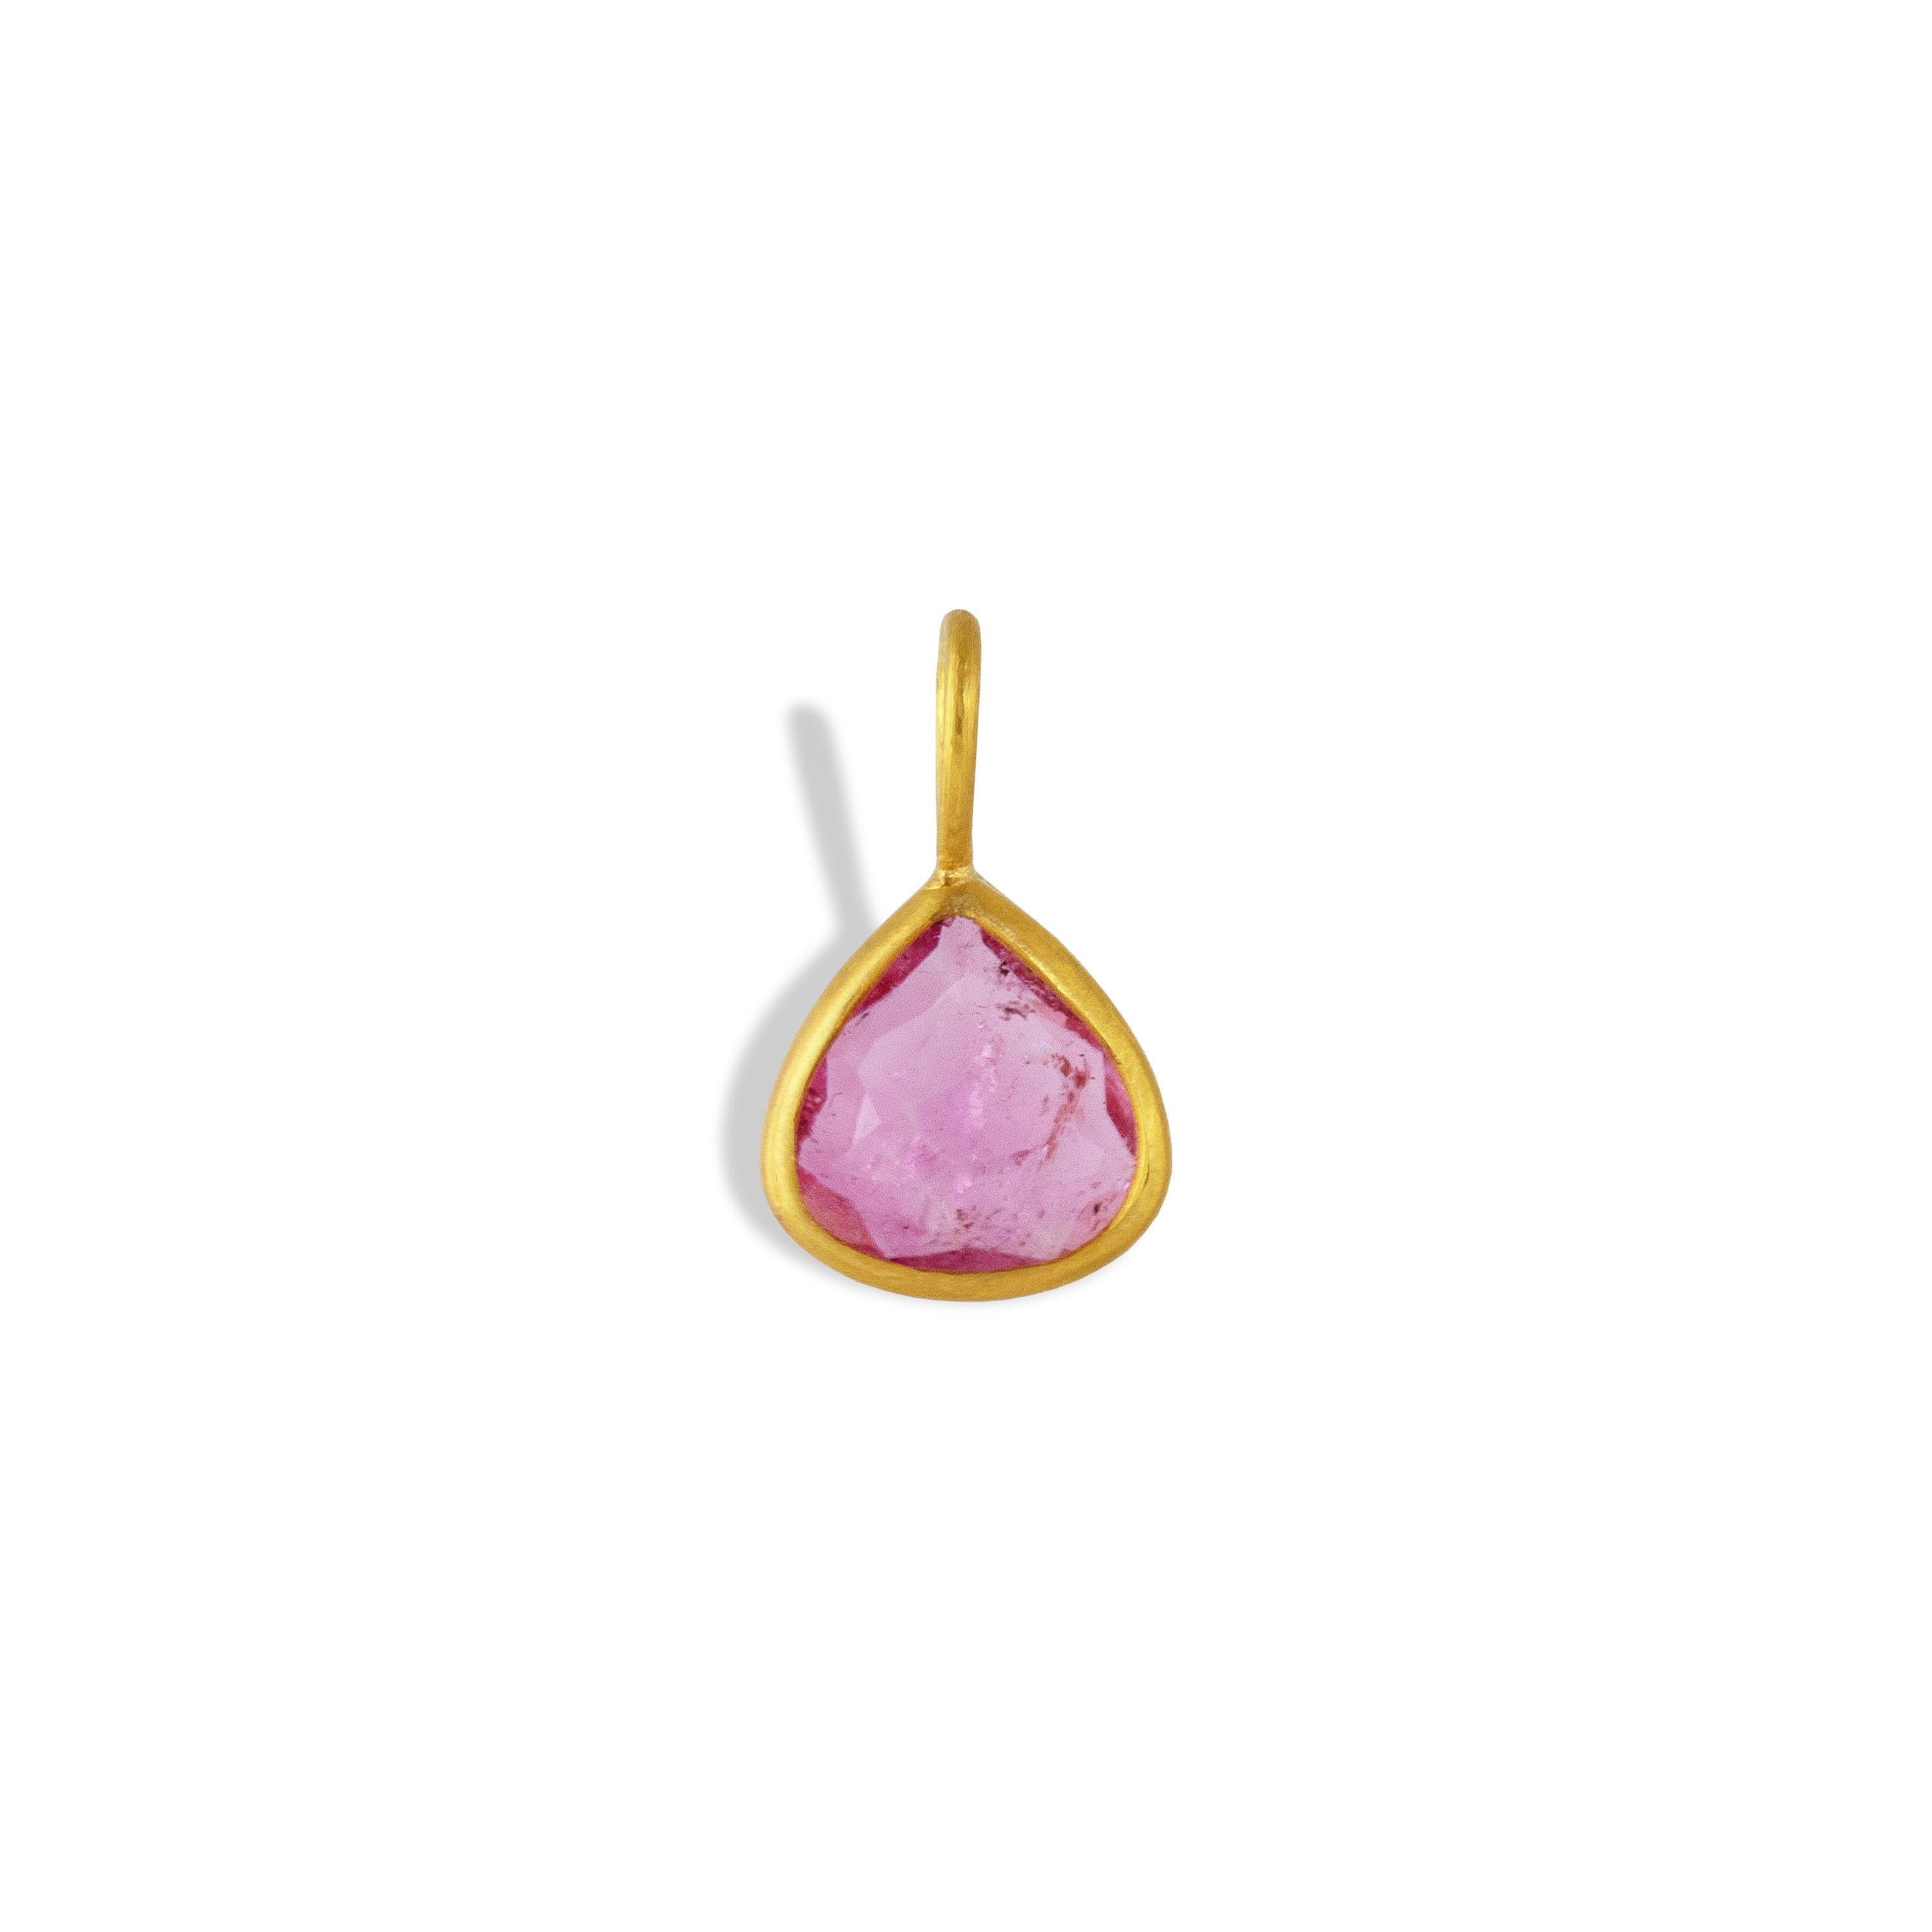 This amazing piece features a pear shaped Pink Tourmaline gemstone measuring 16mm x 9mm and weighing 2.29 carats. This pendant is set in 22k gold and made by hand in our workshop in Jaipur, India.


Tourmaline is known to aid in relieving stress and